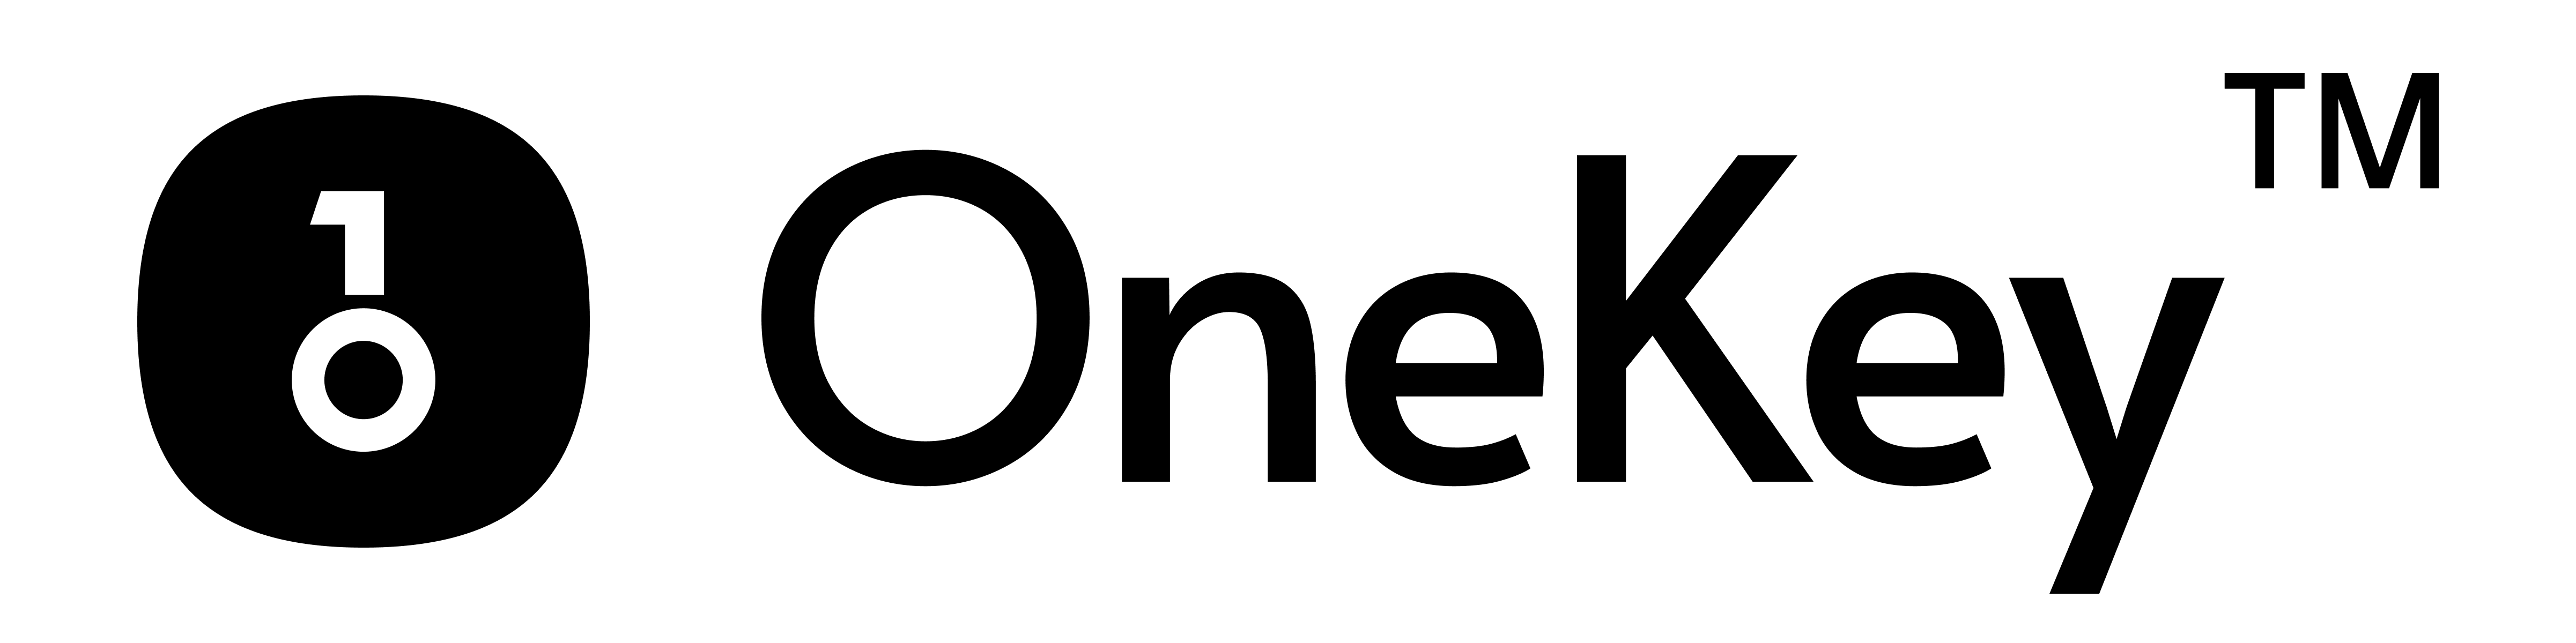 logo_with_text_black.png